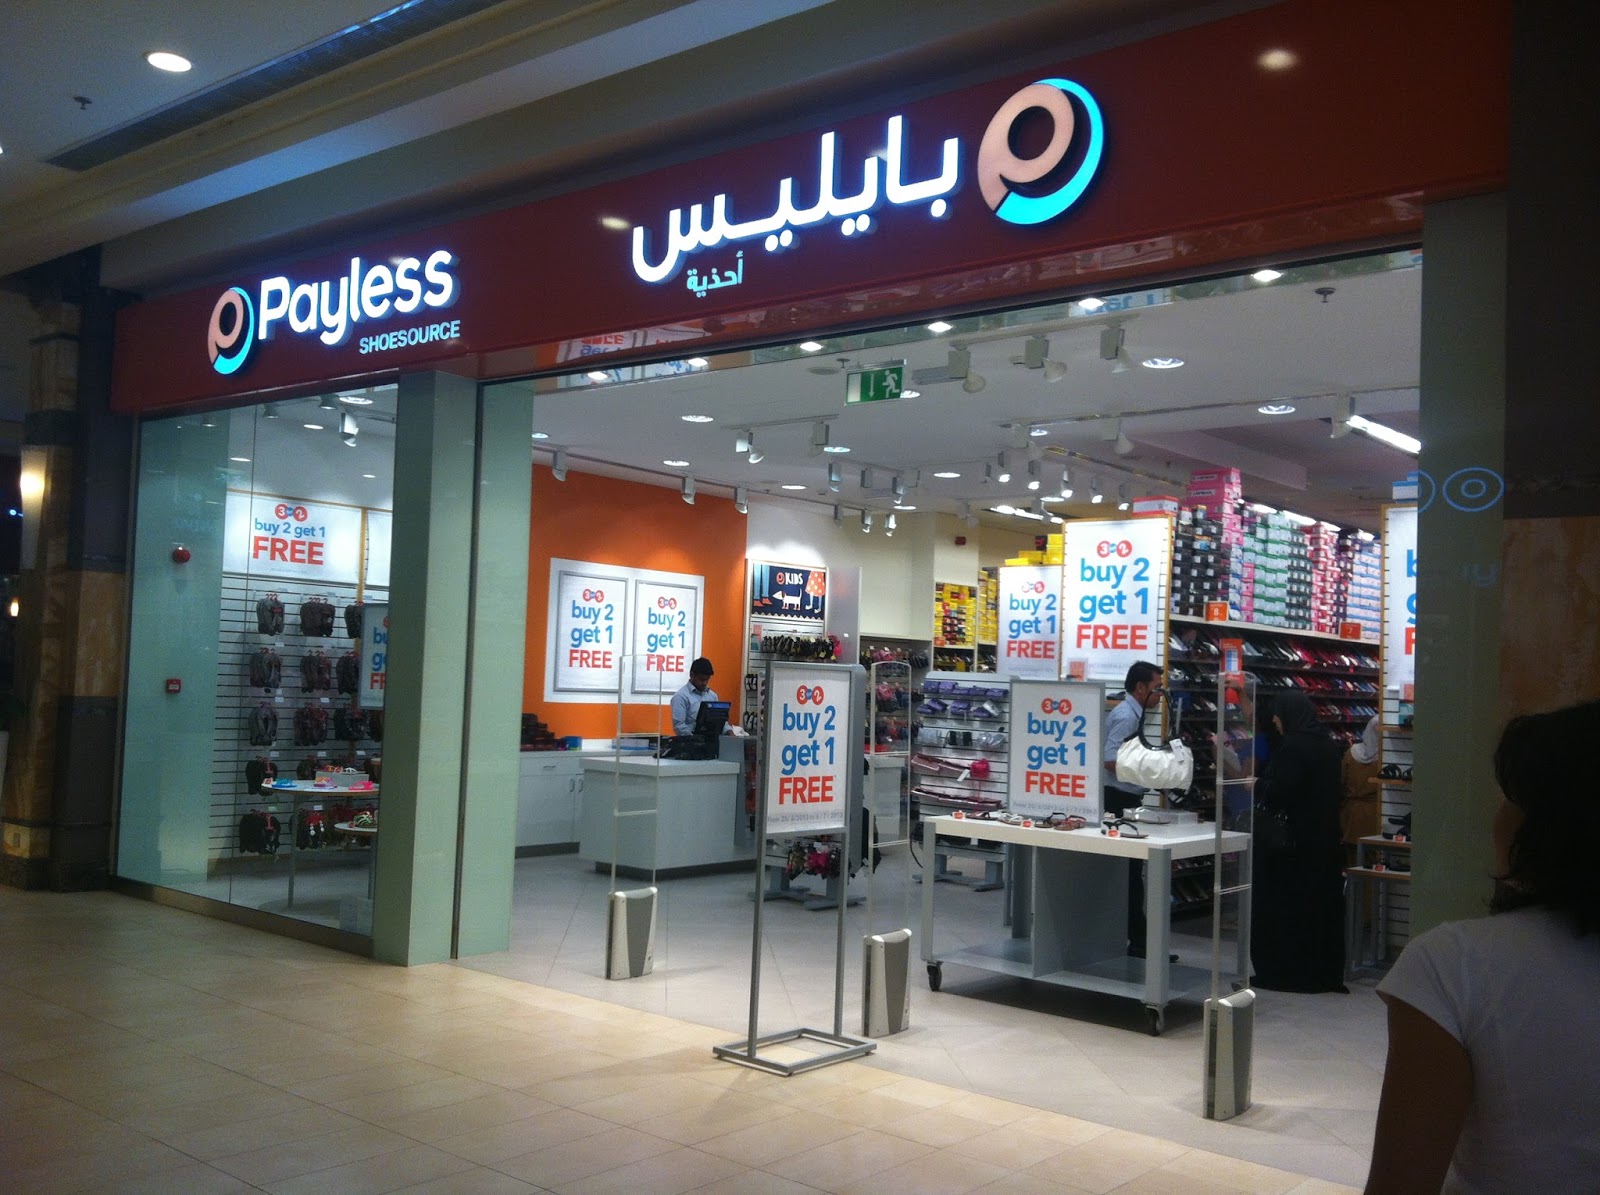 Little Oryx in Qatar: Payless opens as well!!!